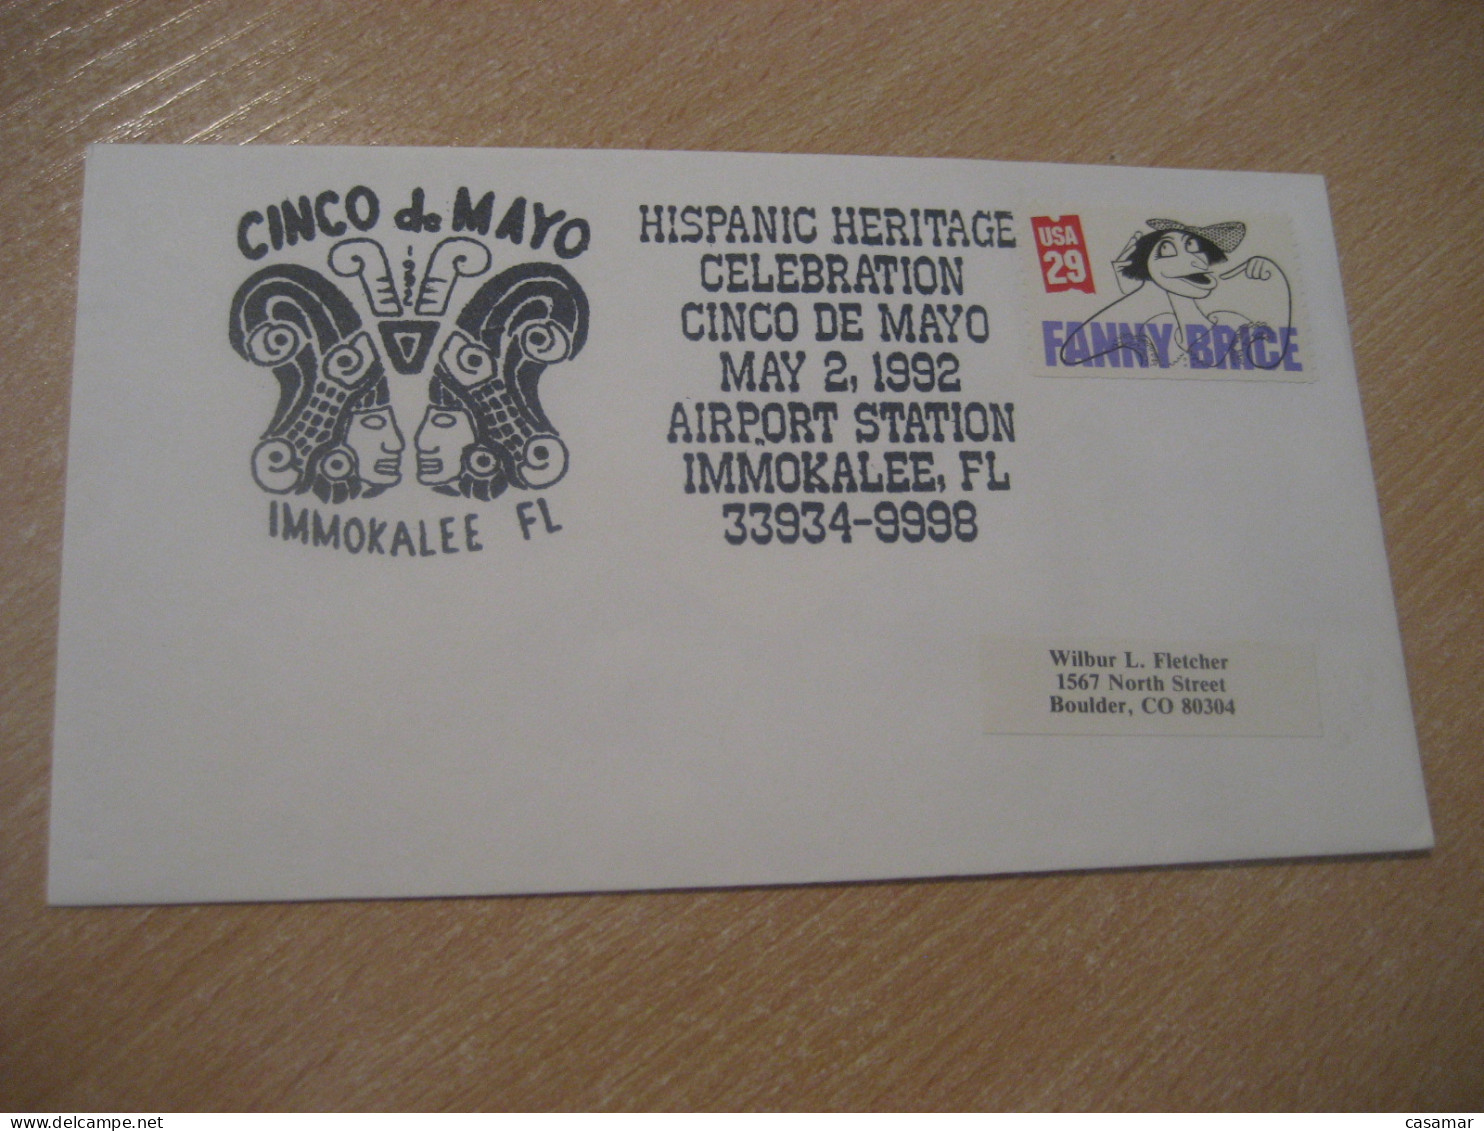 IMMOKALEE 1992 Cinco De Mayo Hispanic Heritage American Indians Indian Cancel Cover USA Indigenous Native History - American Indians